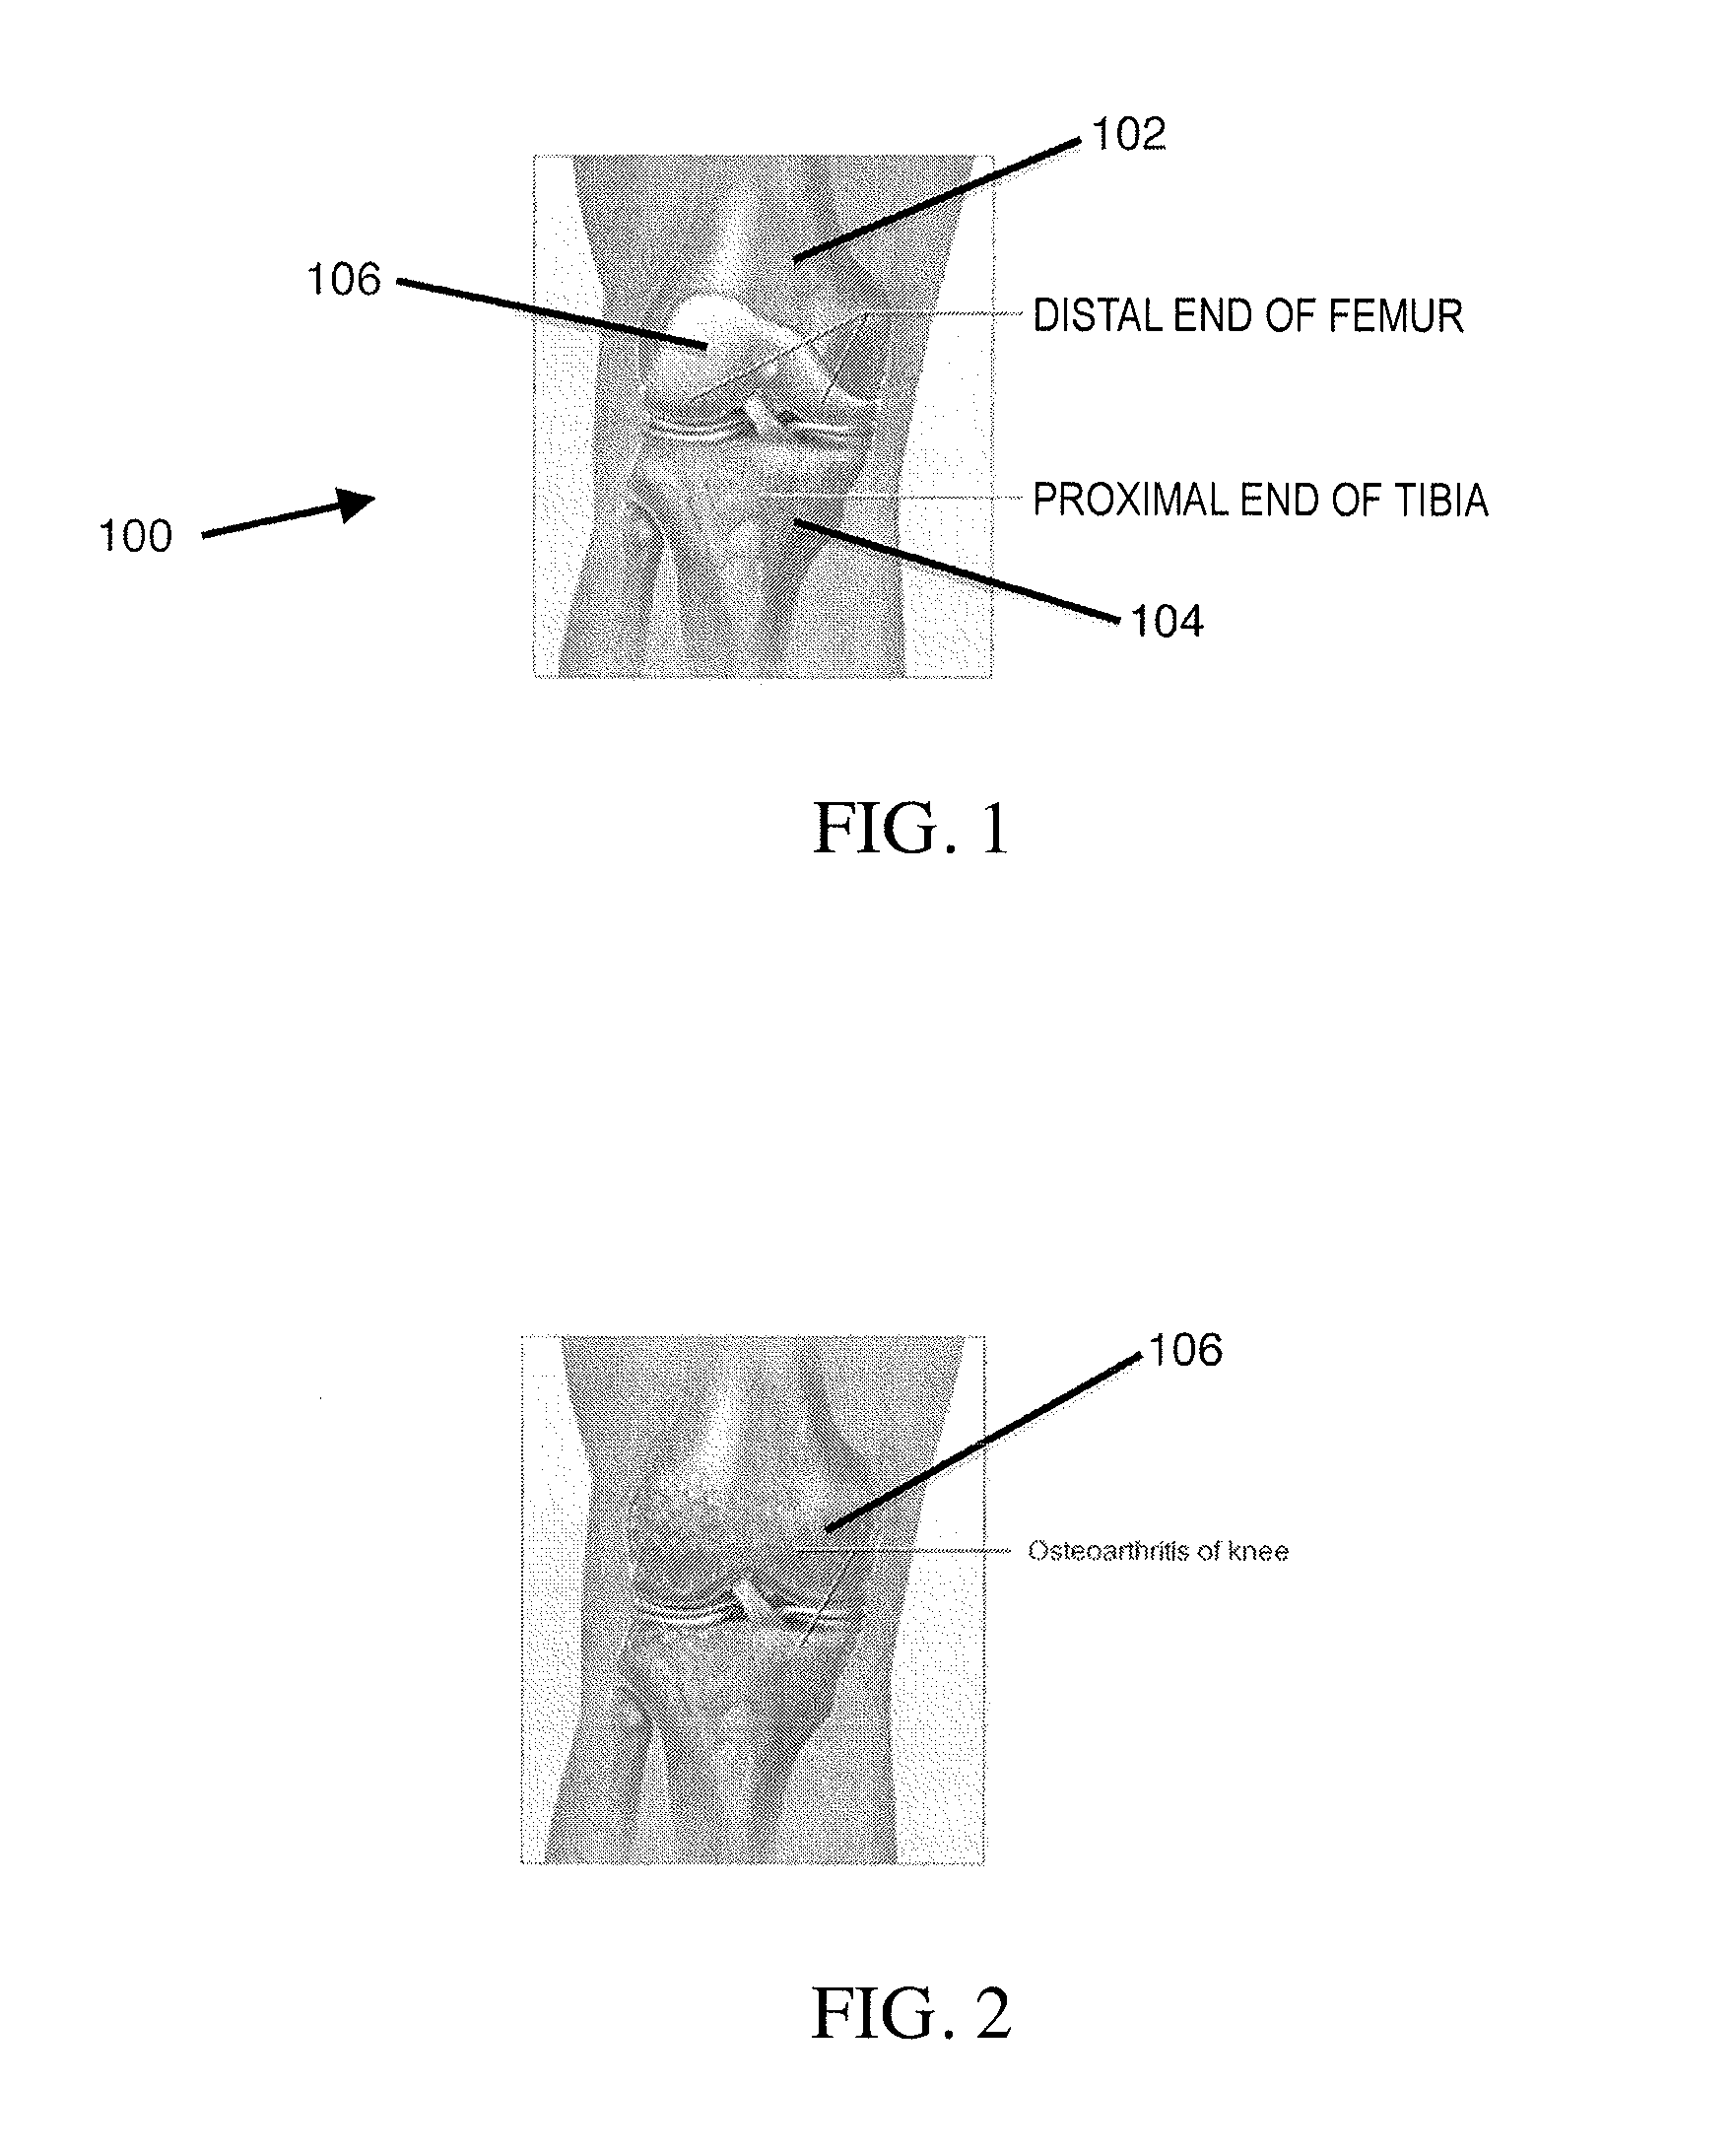 Systems and methods for providing alignment in total knee arthroplasty